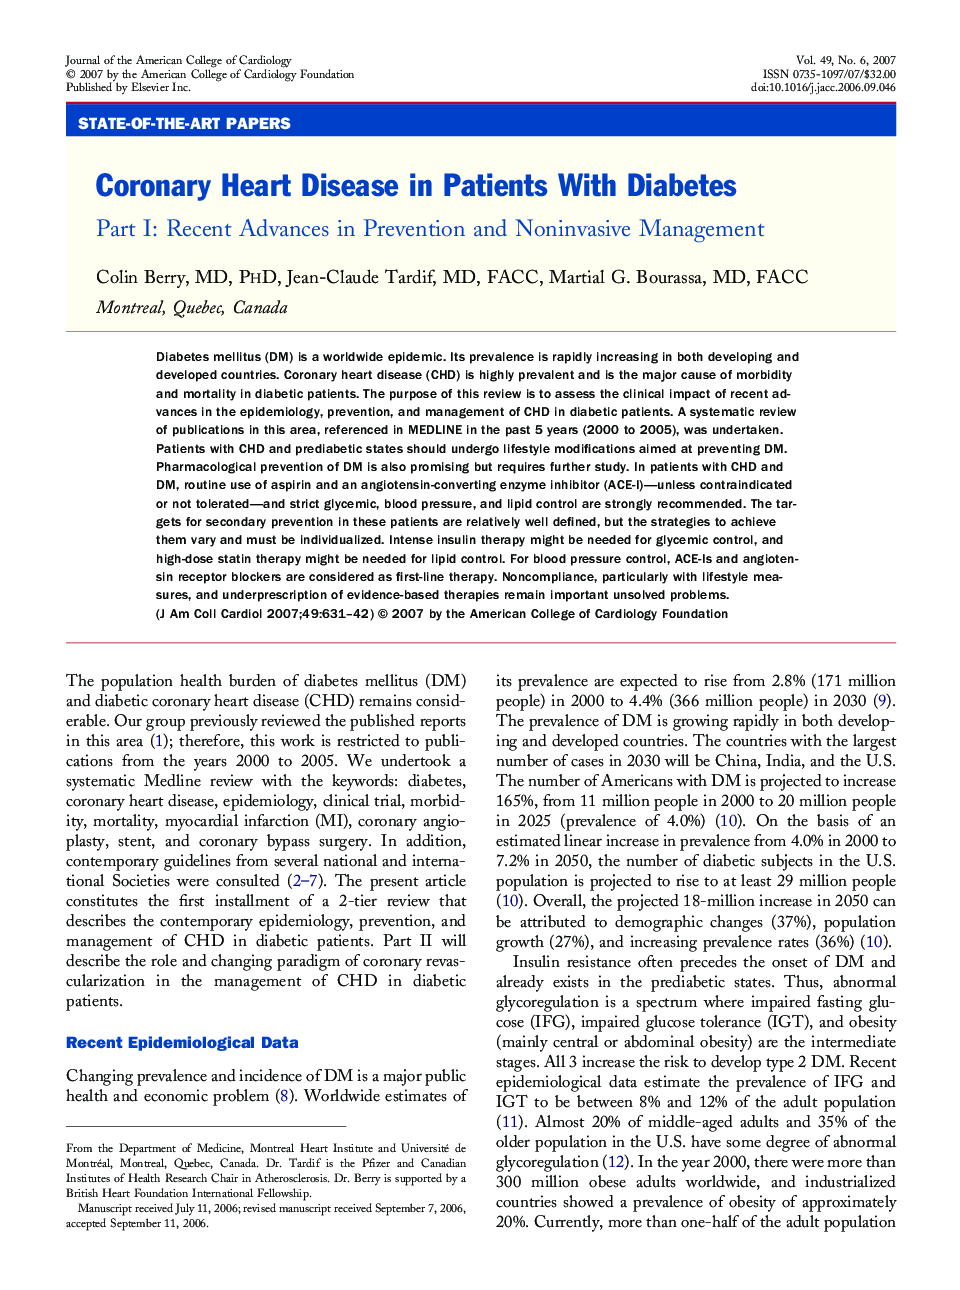 Coronary Heart Disease in Patients With Diabetes: Part I: Recent Advances in Prevention and Noninvasive Management